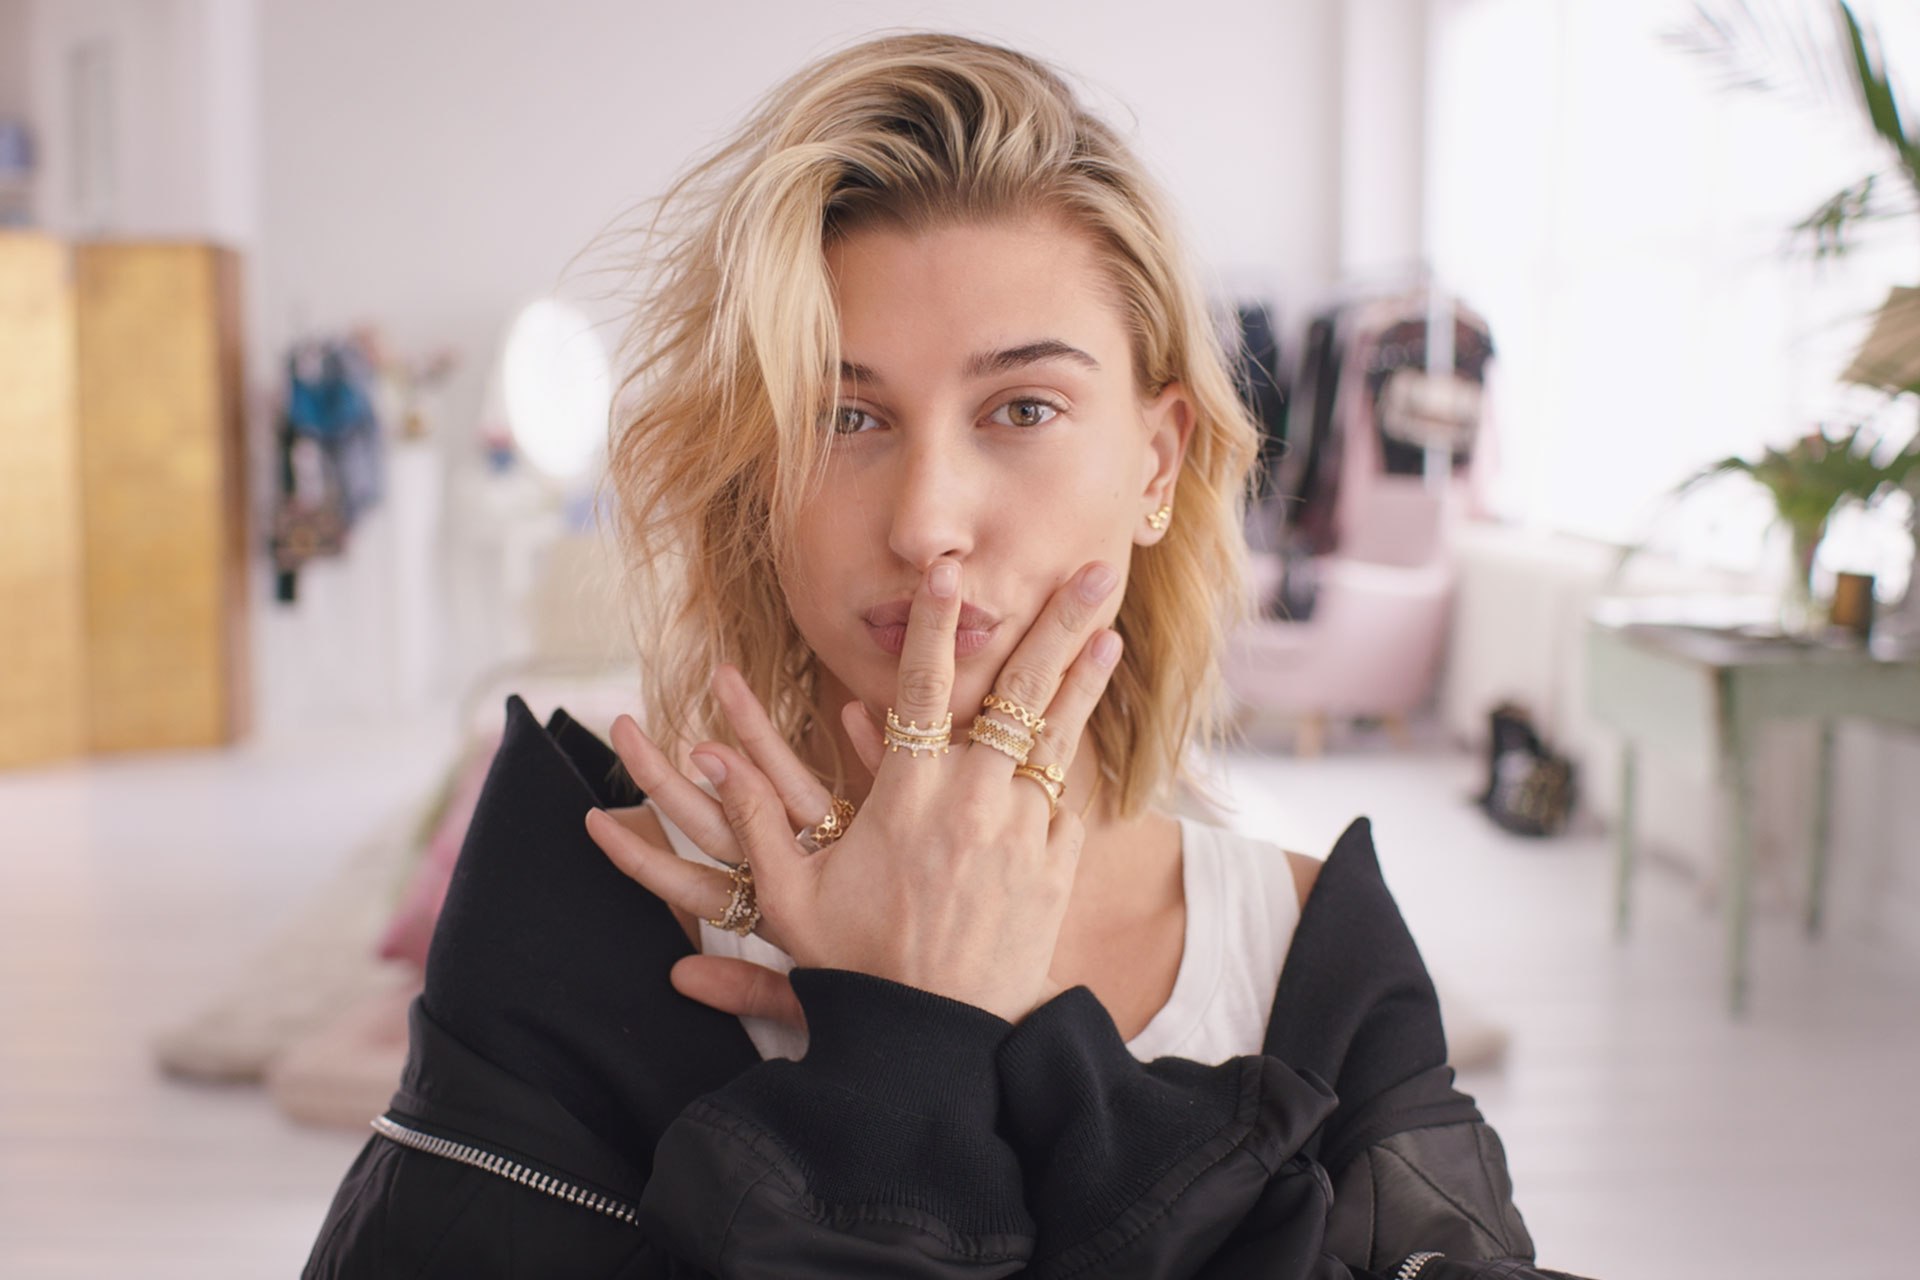 Watch The Full Look With Hailey Baldwin And Pandora The